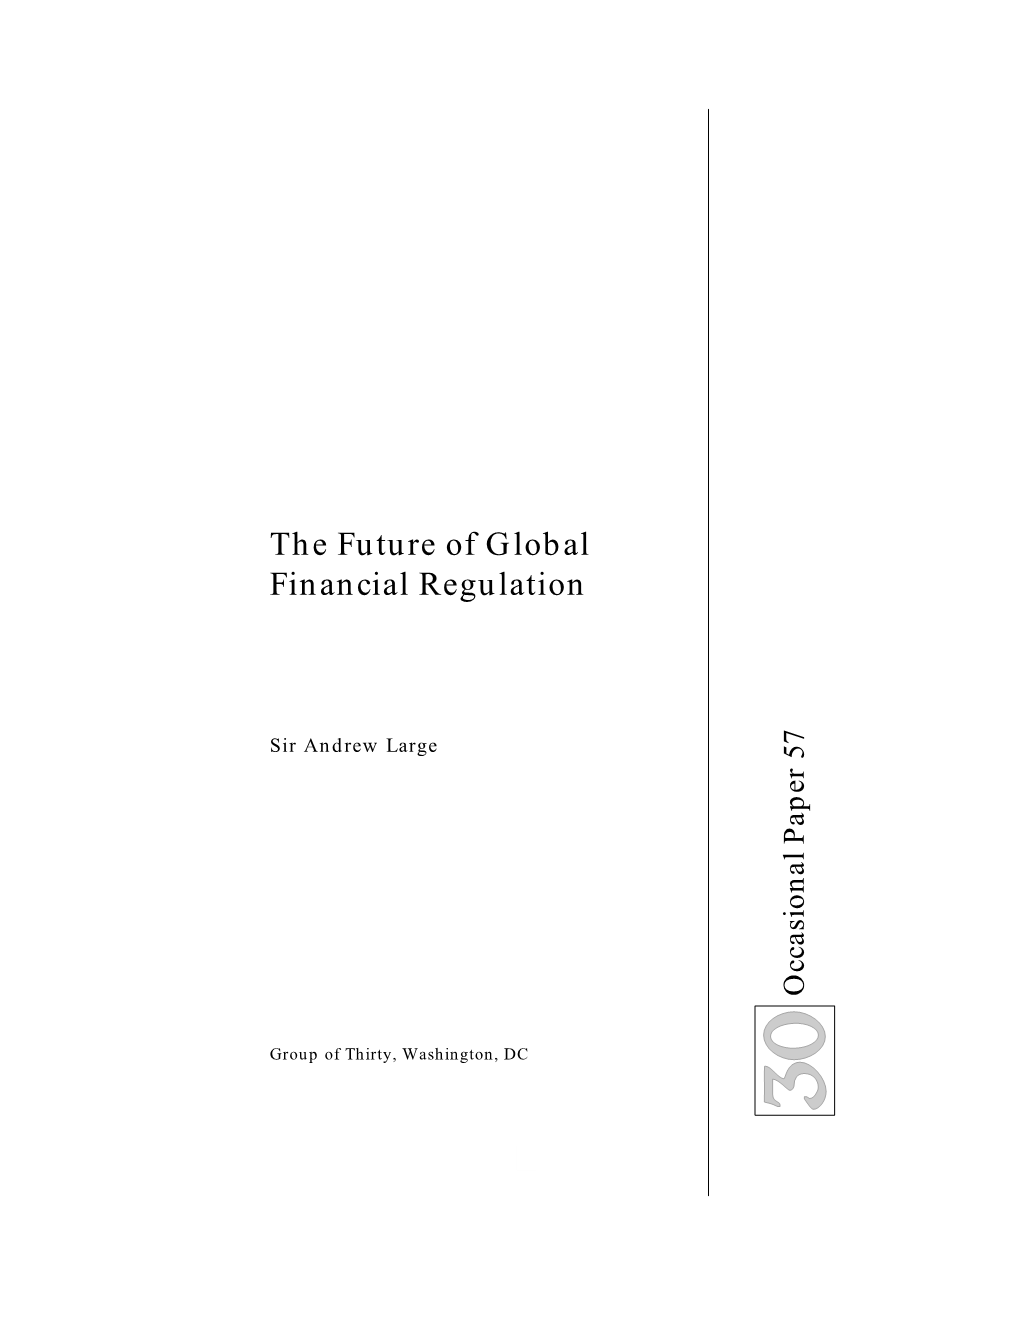 The Future of Global Financial Regulation